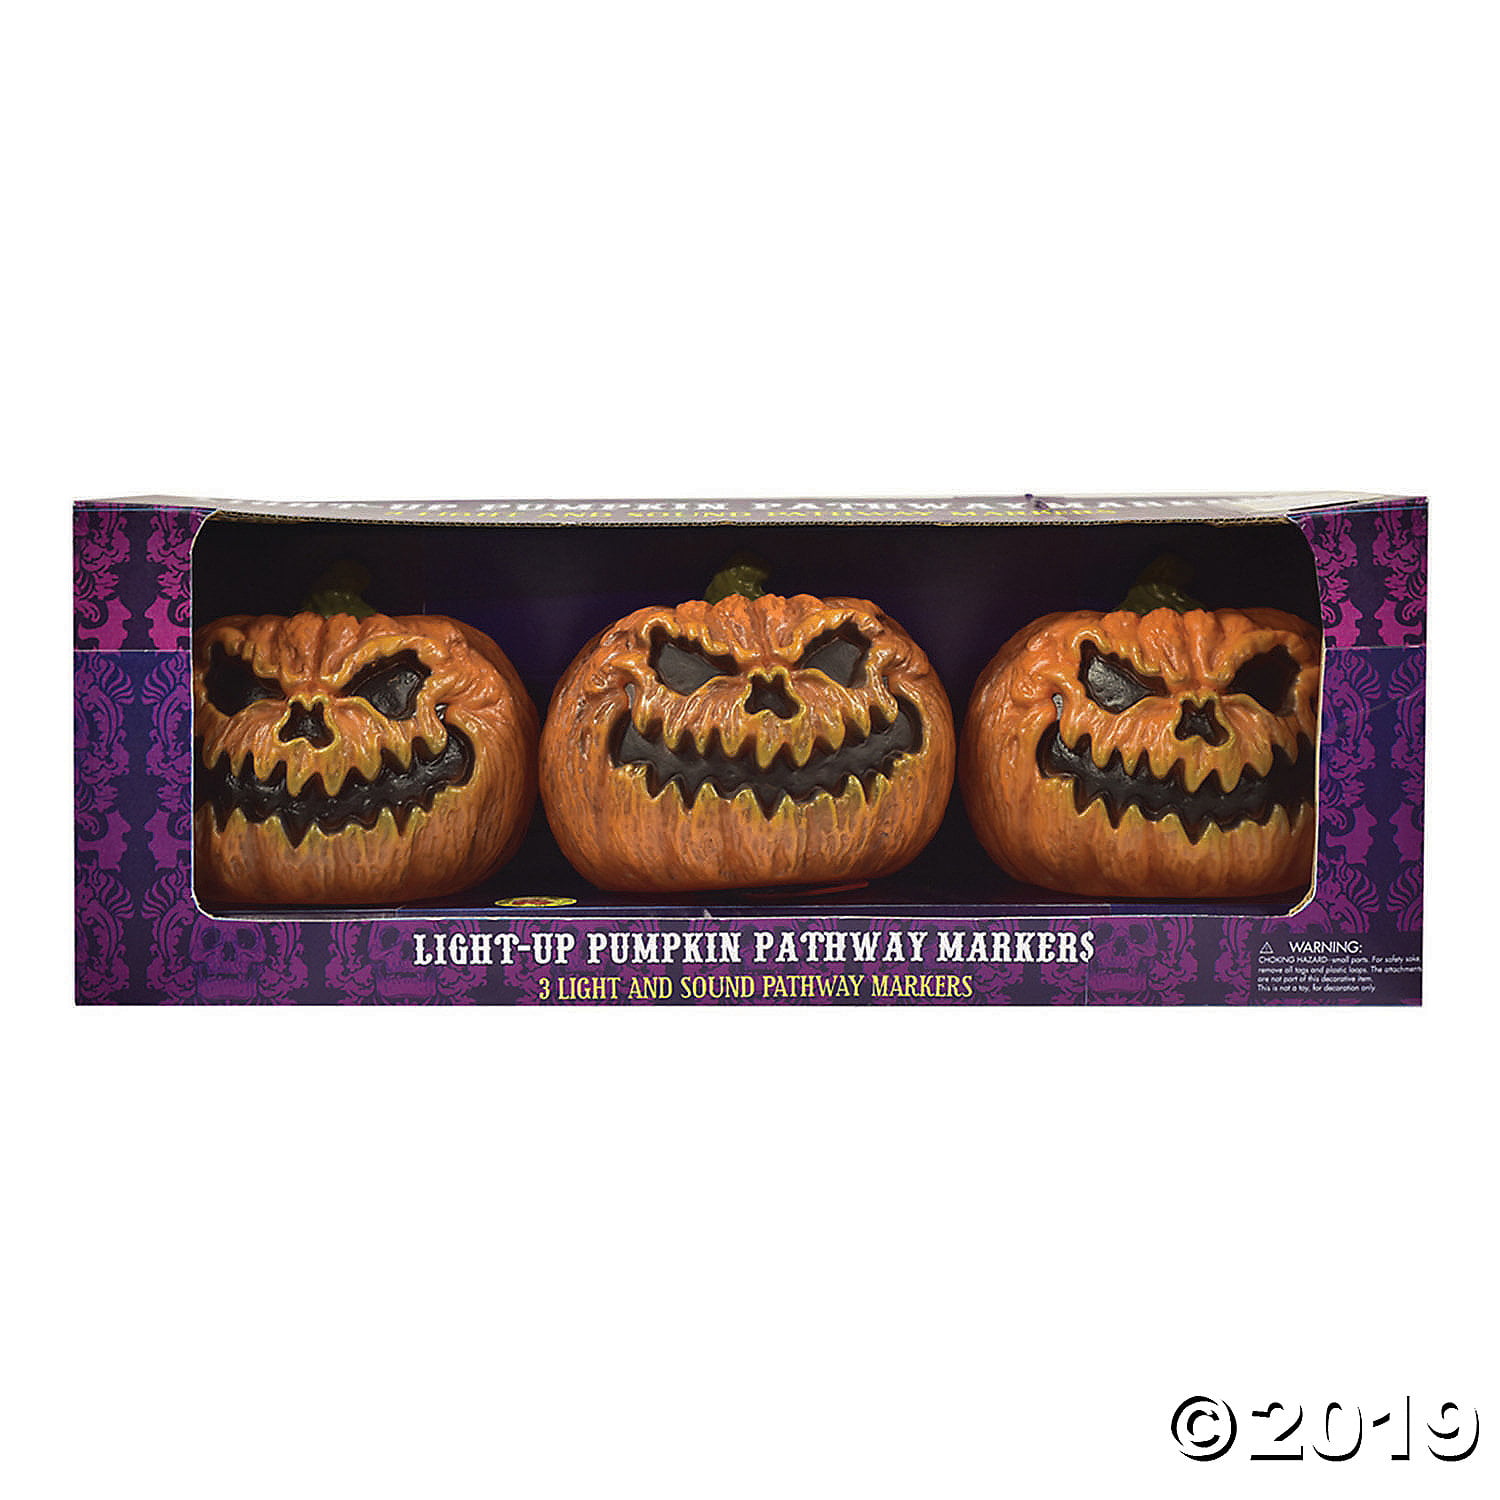 NEW SET OF 3 JACK-O-LANTERNS PATHWAY MARKERS LIGHTS & EERIE SOUNDS HALLOWEEN 